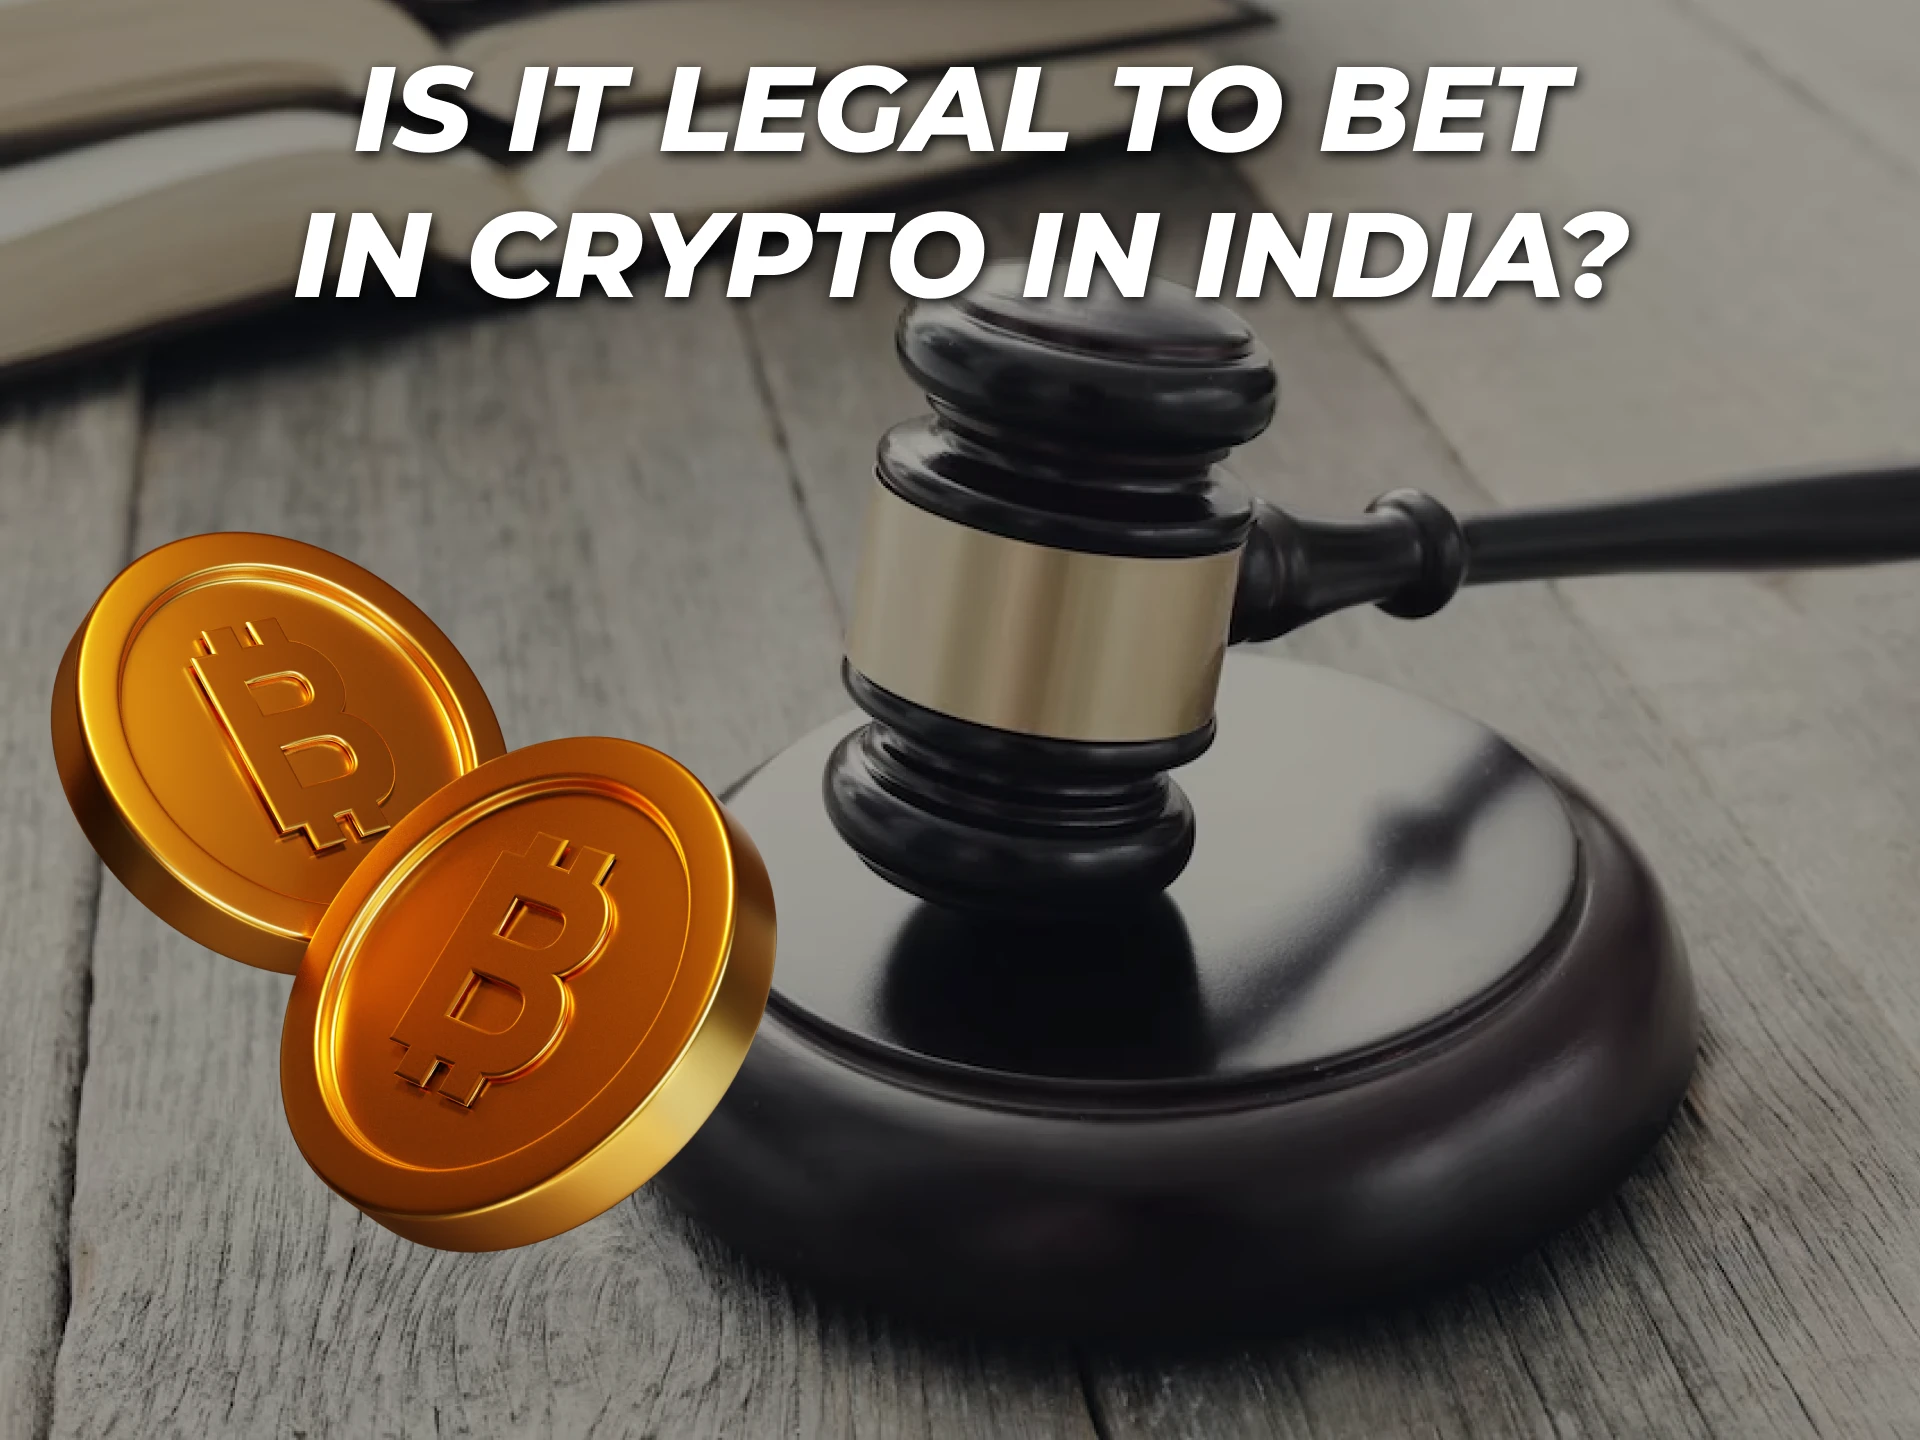 You can bet on sports using cryptocurrency legally.